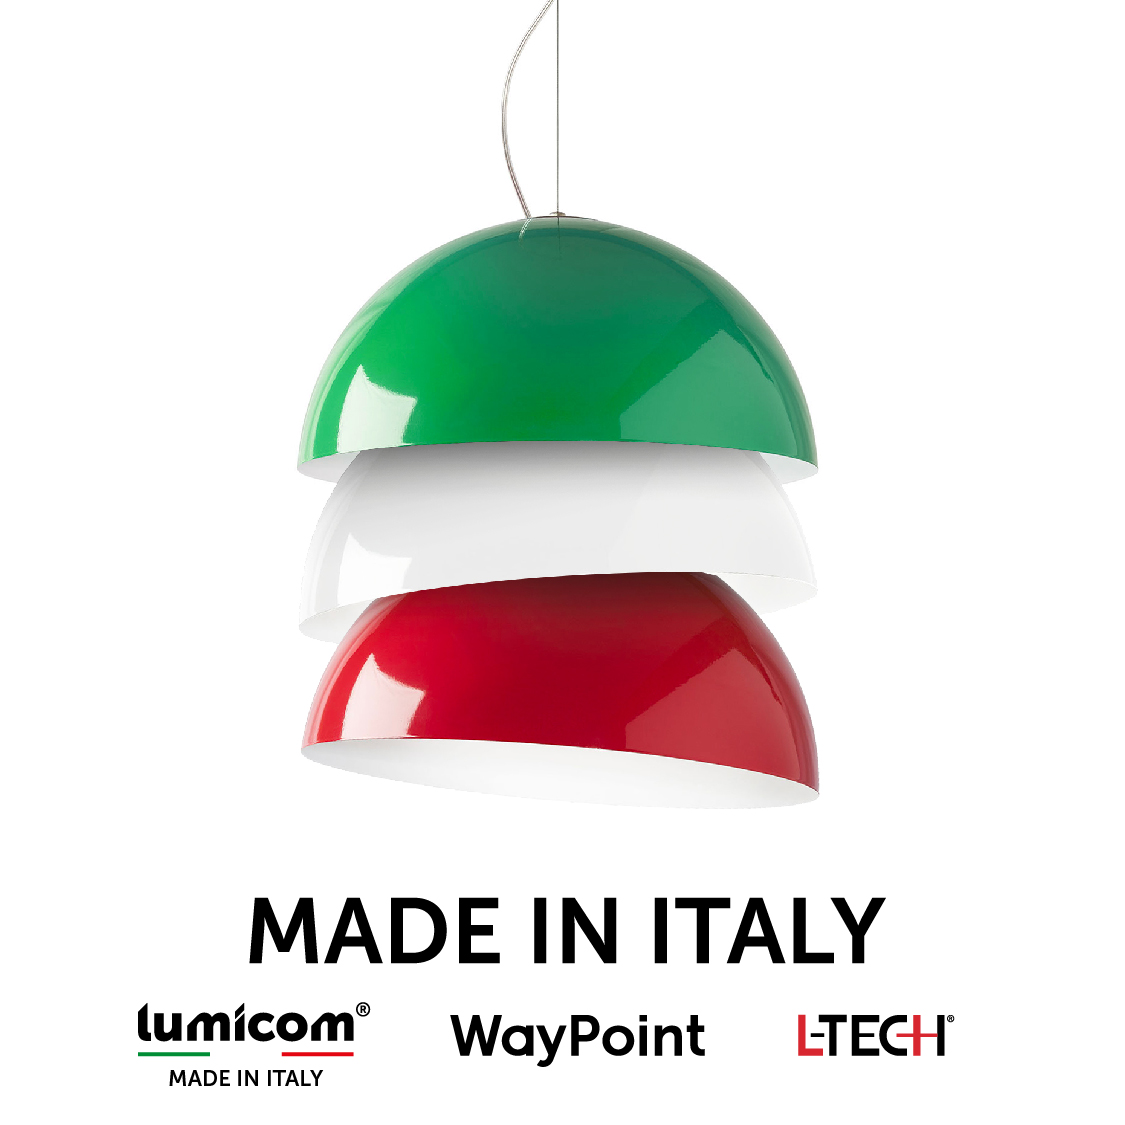 MADE IN ITALY AS A BRAND IDENTITY FACTOR